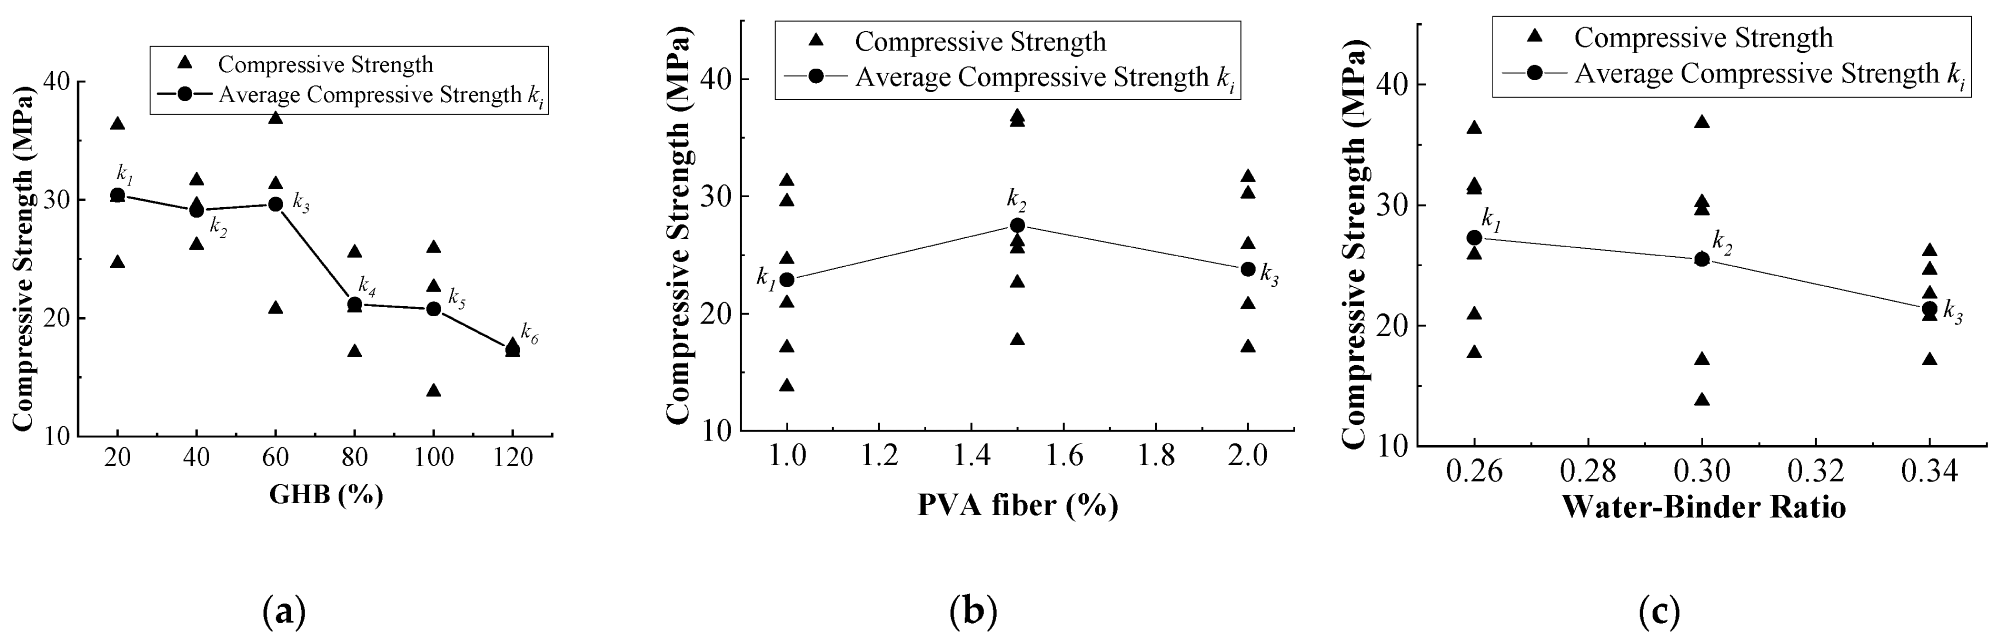 Relationship of GPCC compressive strength with each factor: (a) GHB content; (b) PVA fiber content; (c) water-binder ratio.